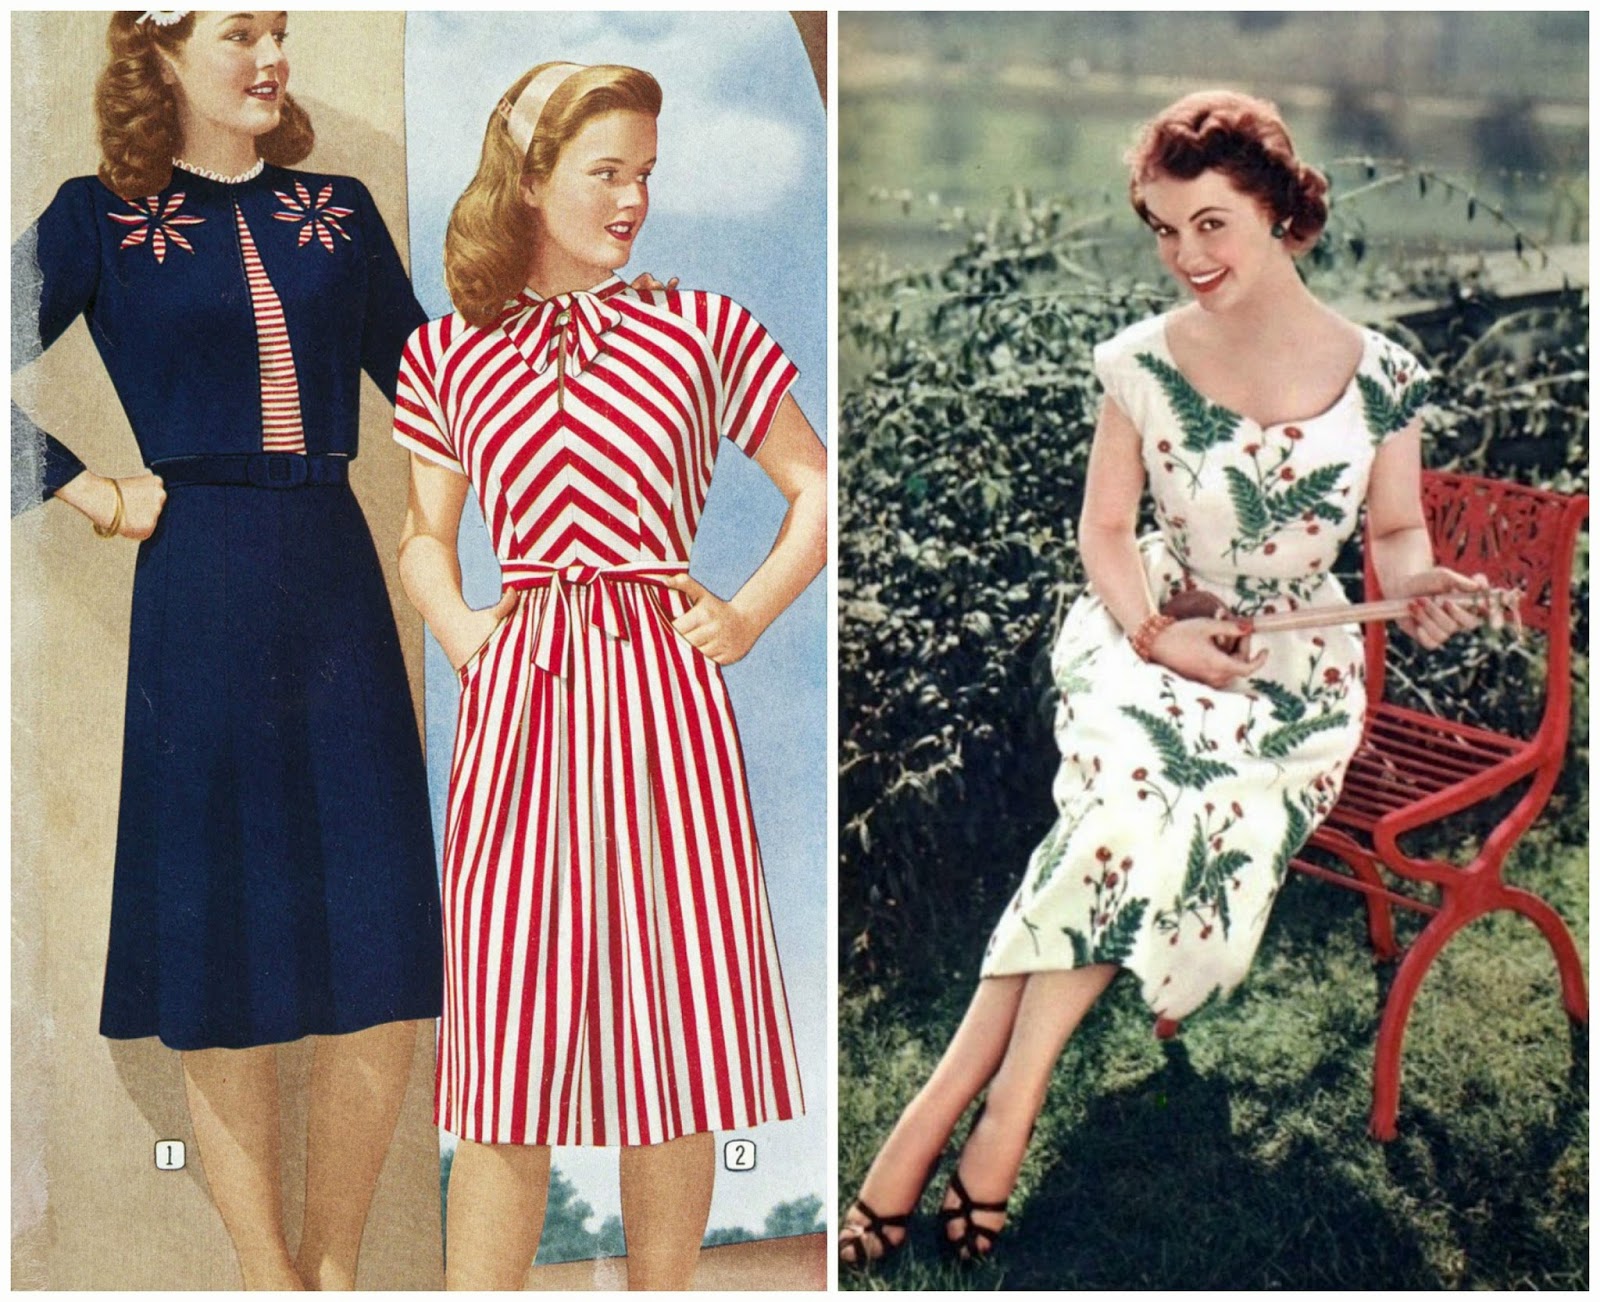 The 1950's style and modesty